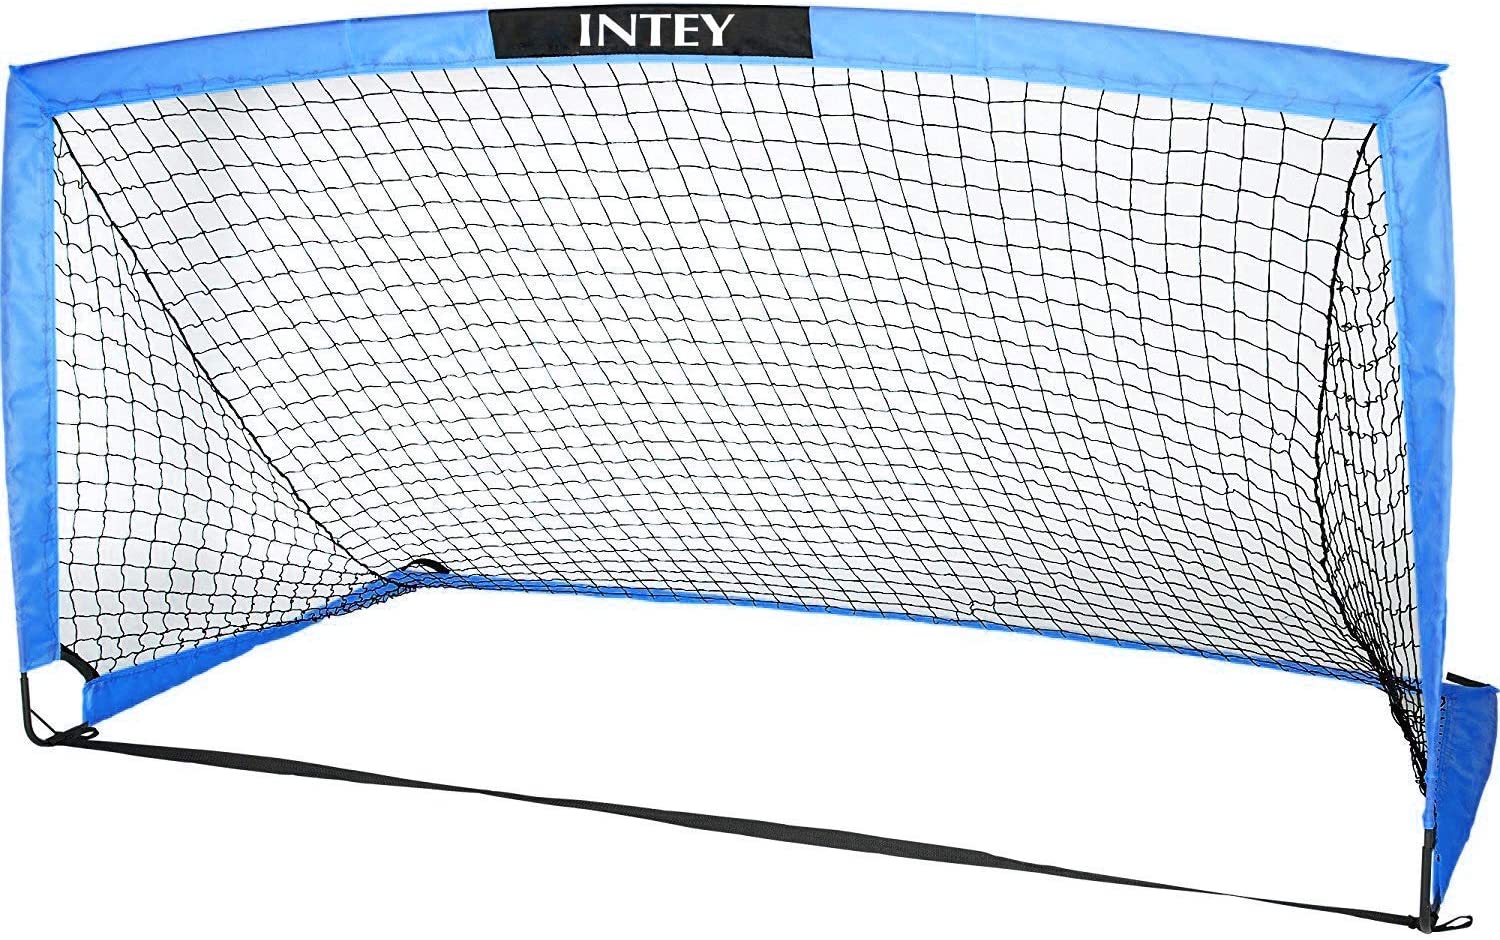 intey-indoor-outdoor-soccer-goal-with-carry-bag-2-size-soccer-goal